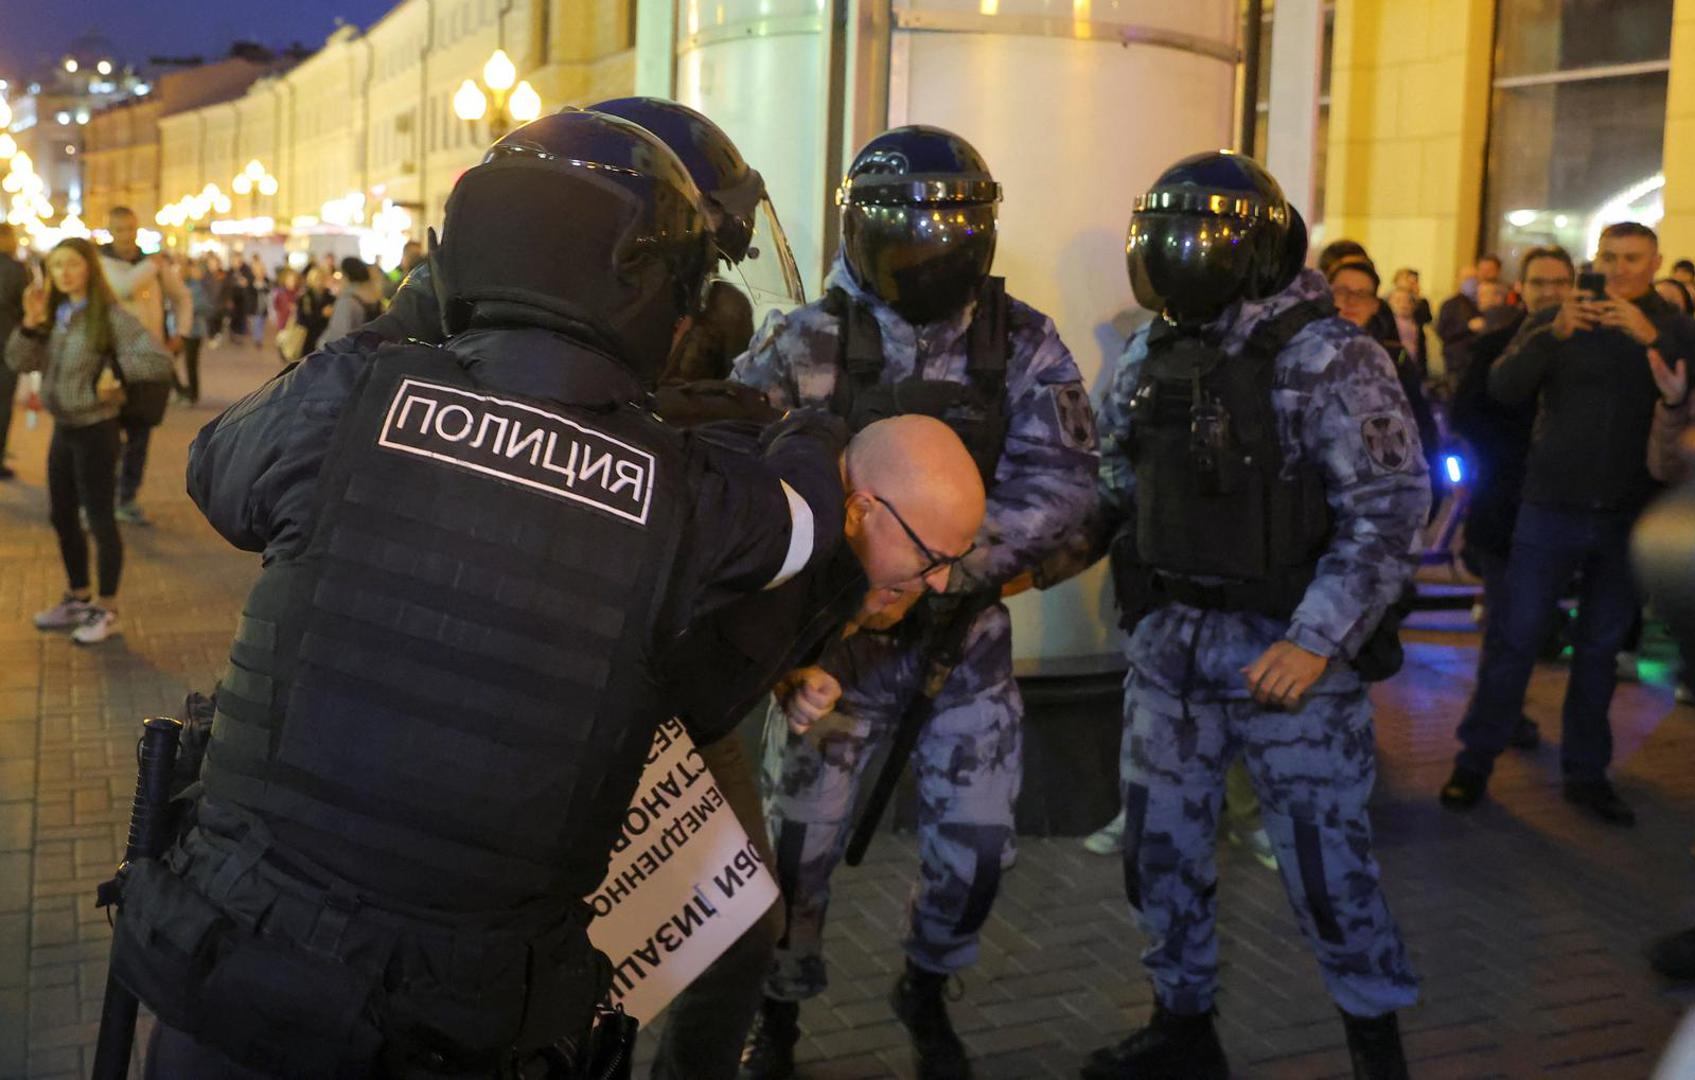 Russian police officers detain a participant during an unsanctioned rally, after opposition activists called for street protests against the mobilisation of reservists ordered by President Vladimir Putin, in Moscow, Russia September 21, 2022. REUTERS/REUTERS PHOTOGRAPHER Photo: Reuters Photographer/REUTERS